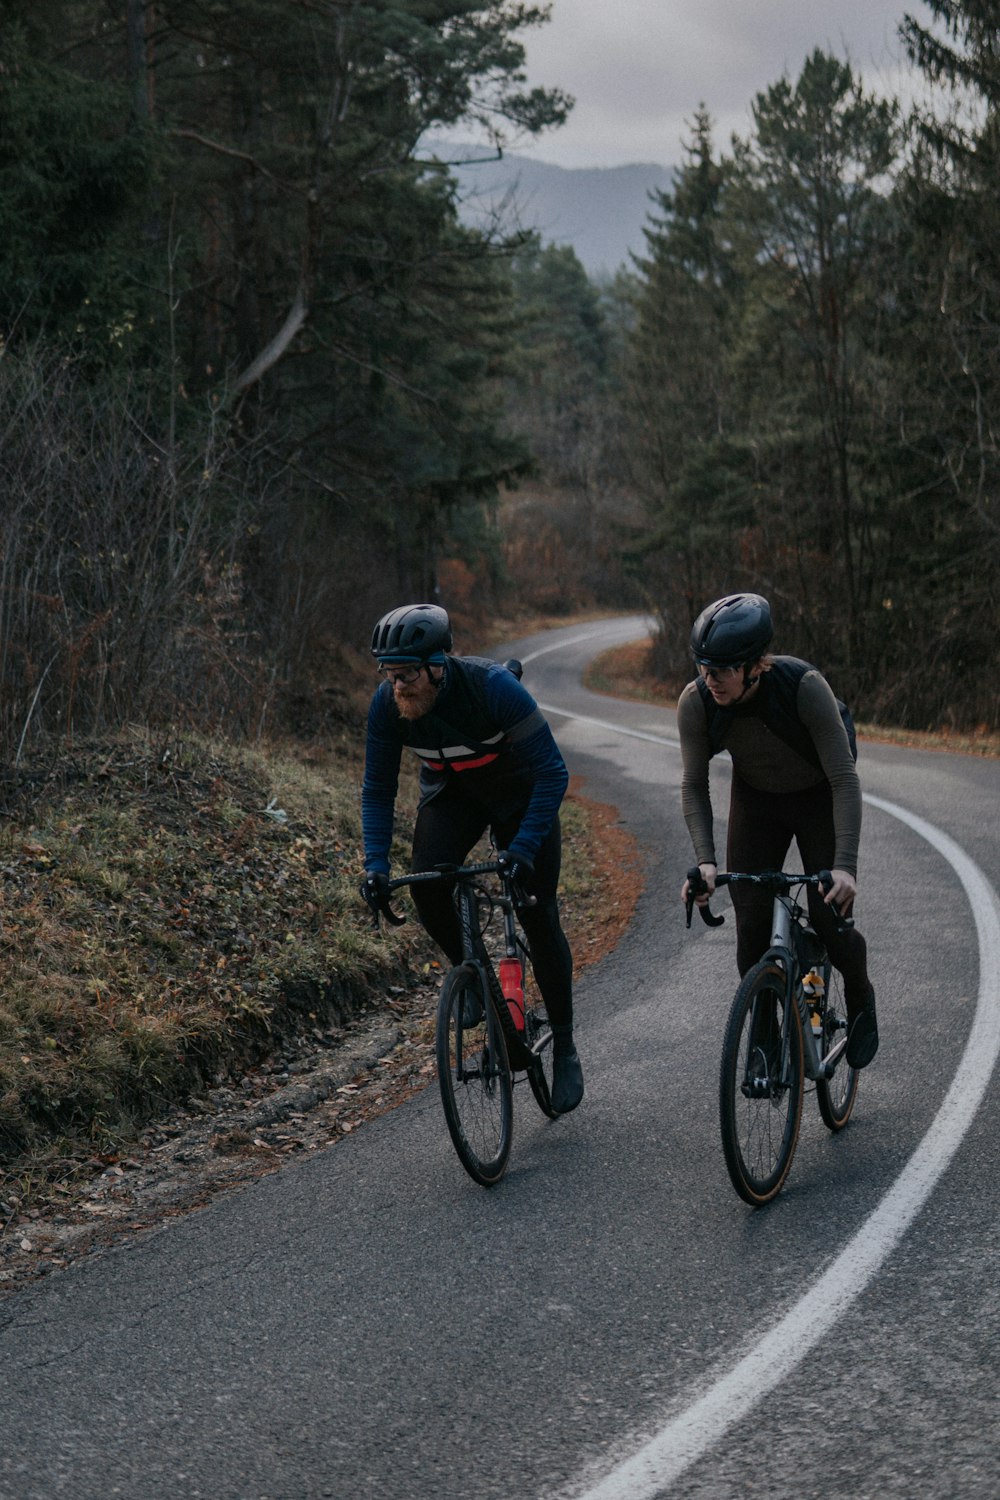 two bicyclists are riding down a winding road